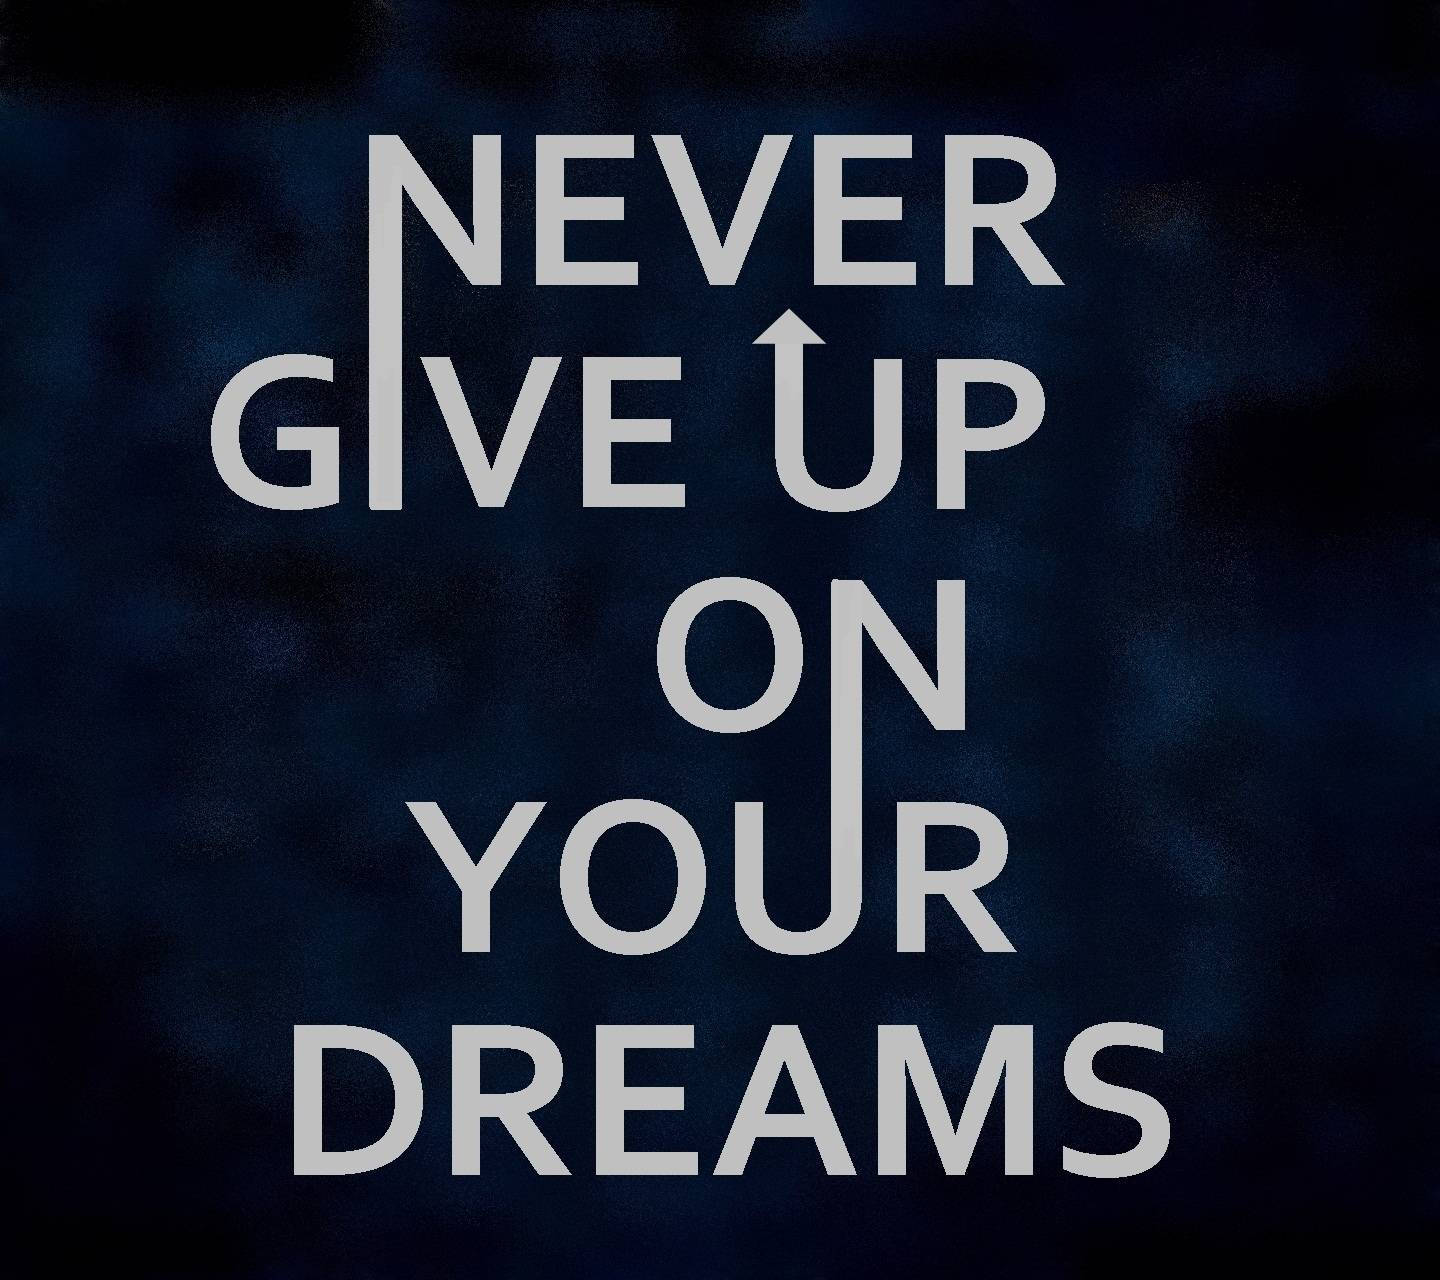 Download Never Give Up On Dreams Wallpaper 